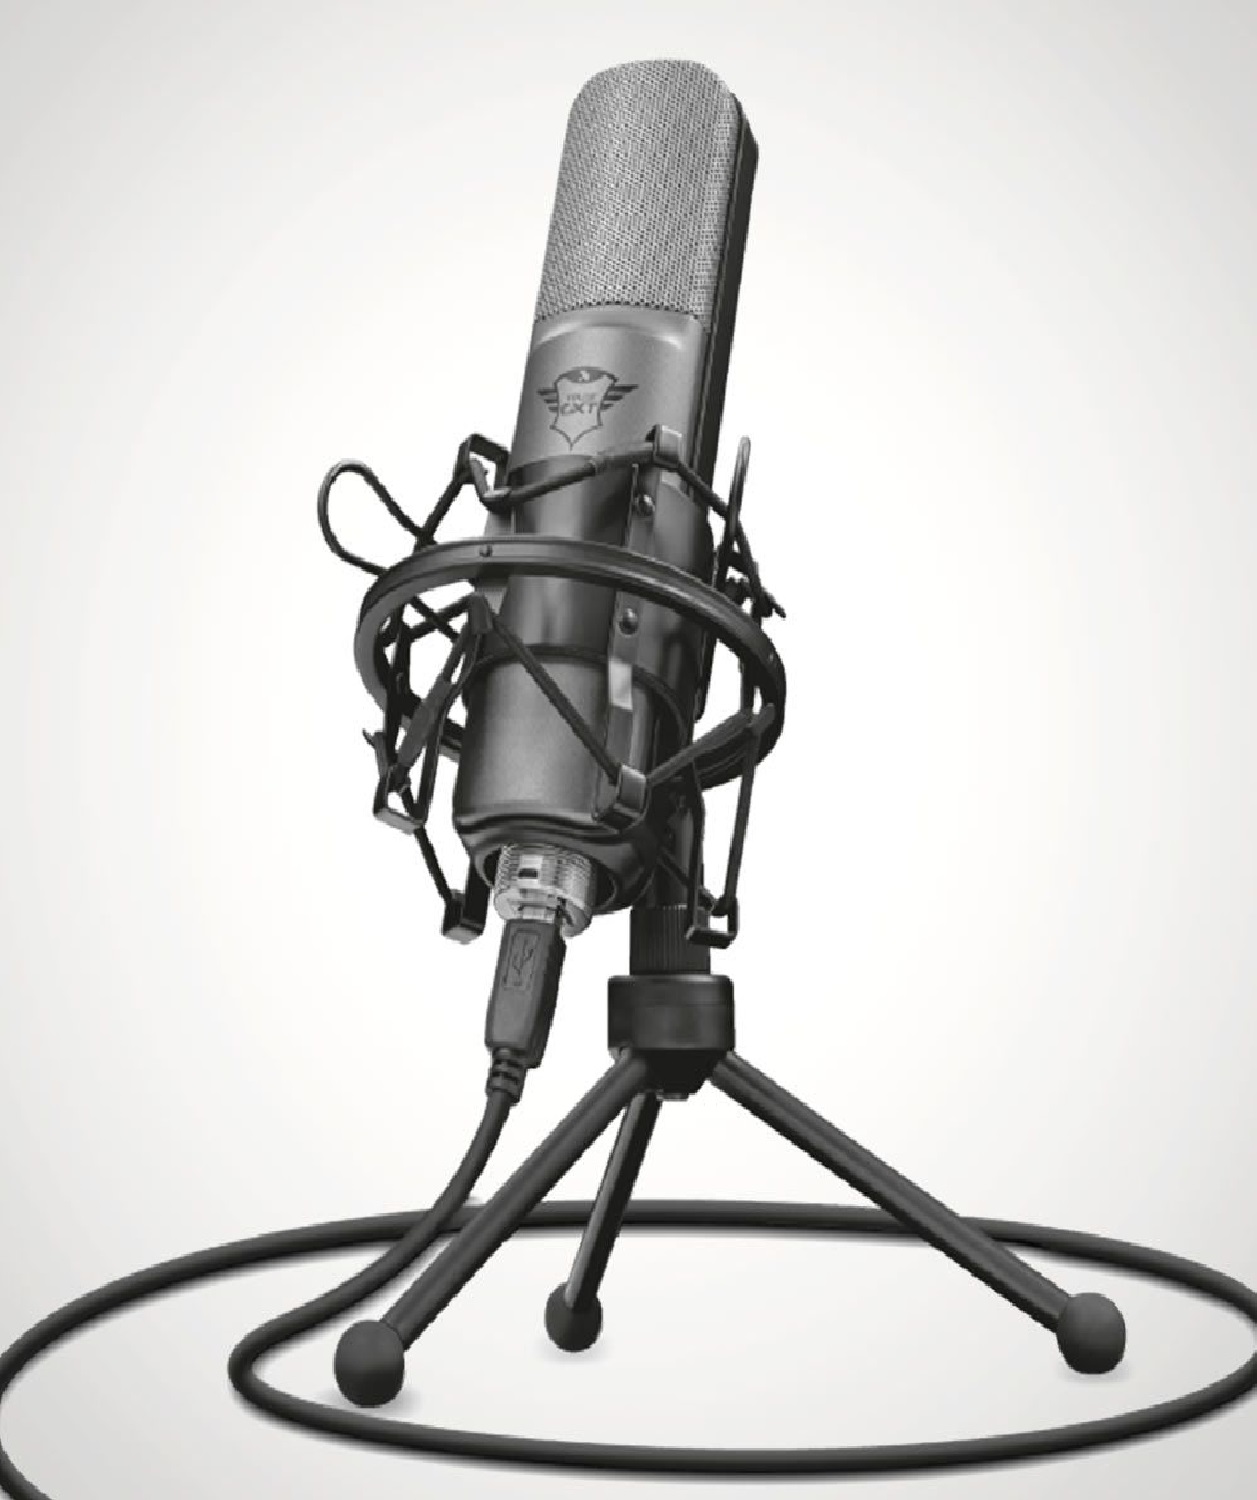 Trust GXT 242 Lance Streaming microphone